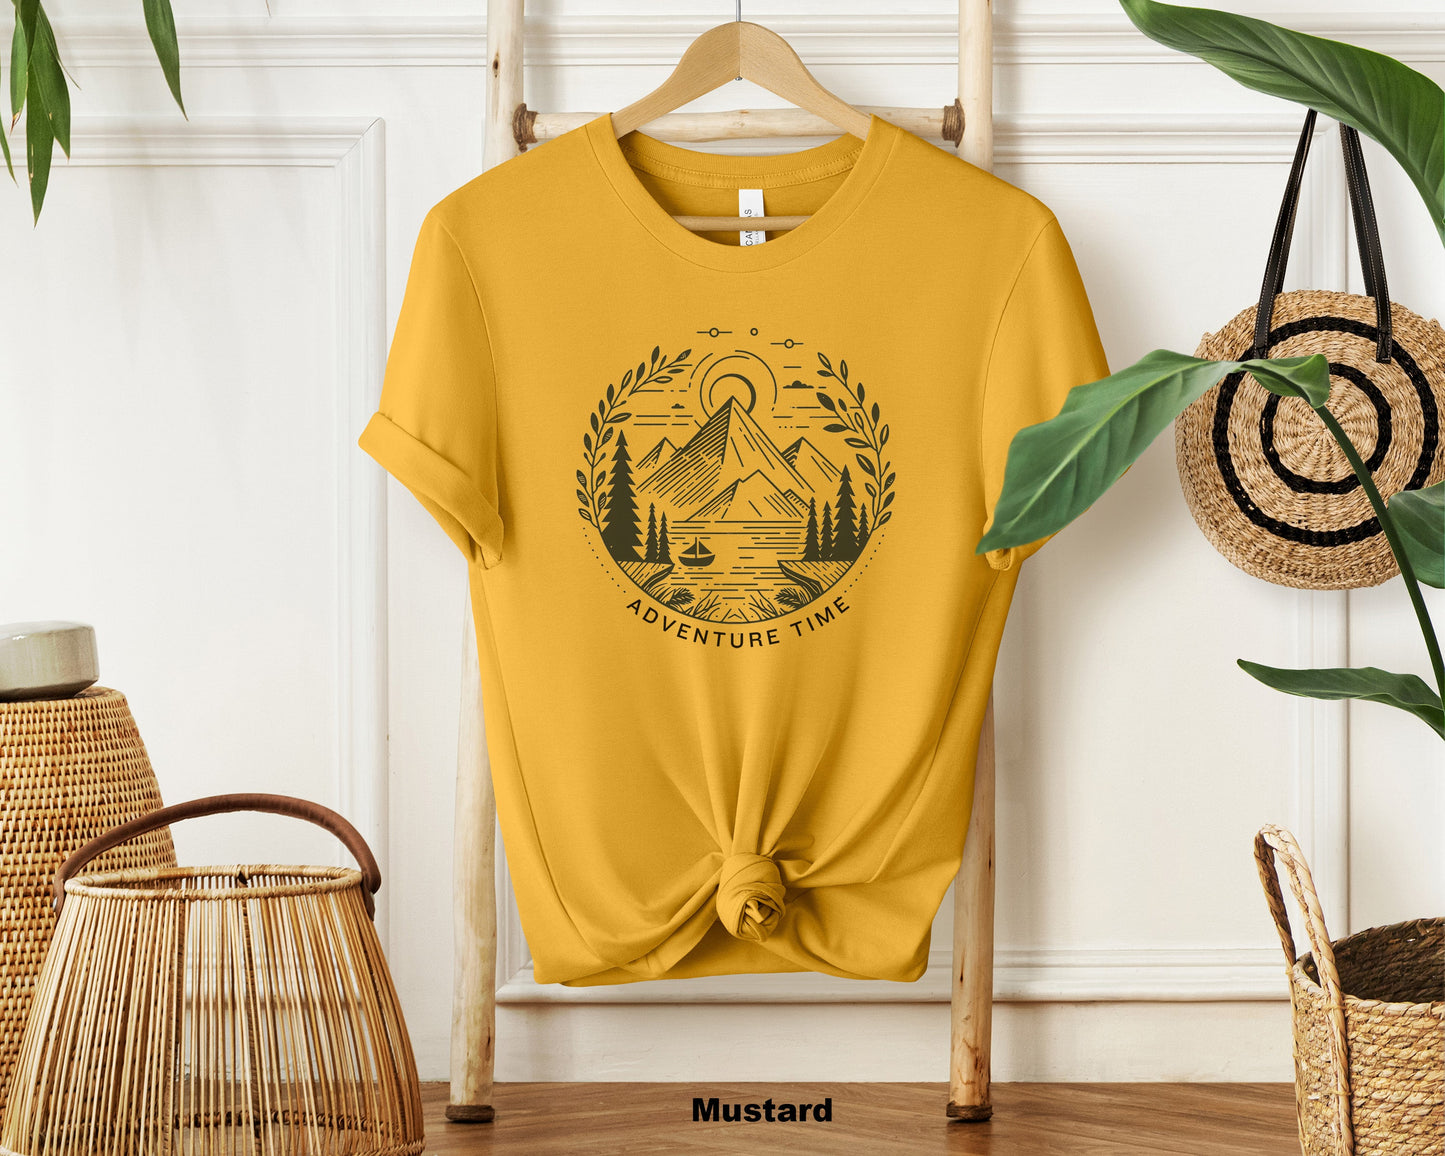 "Adventure Time Travel T-Shirt - Unisex Short Sleeve Crewneck with Minimalist Line Art Design for Travelling and Camping Enthusiasts"